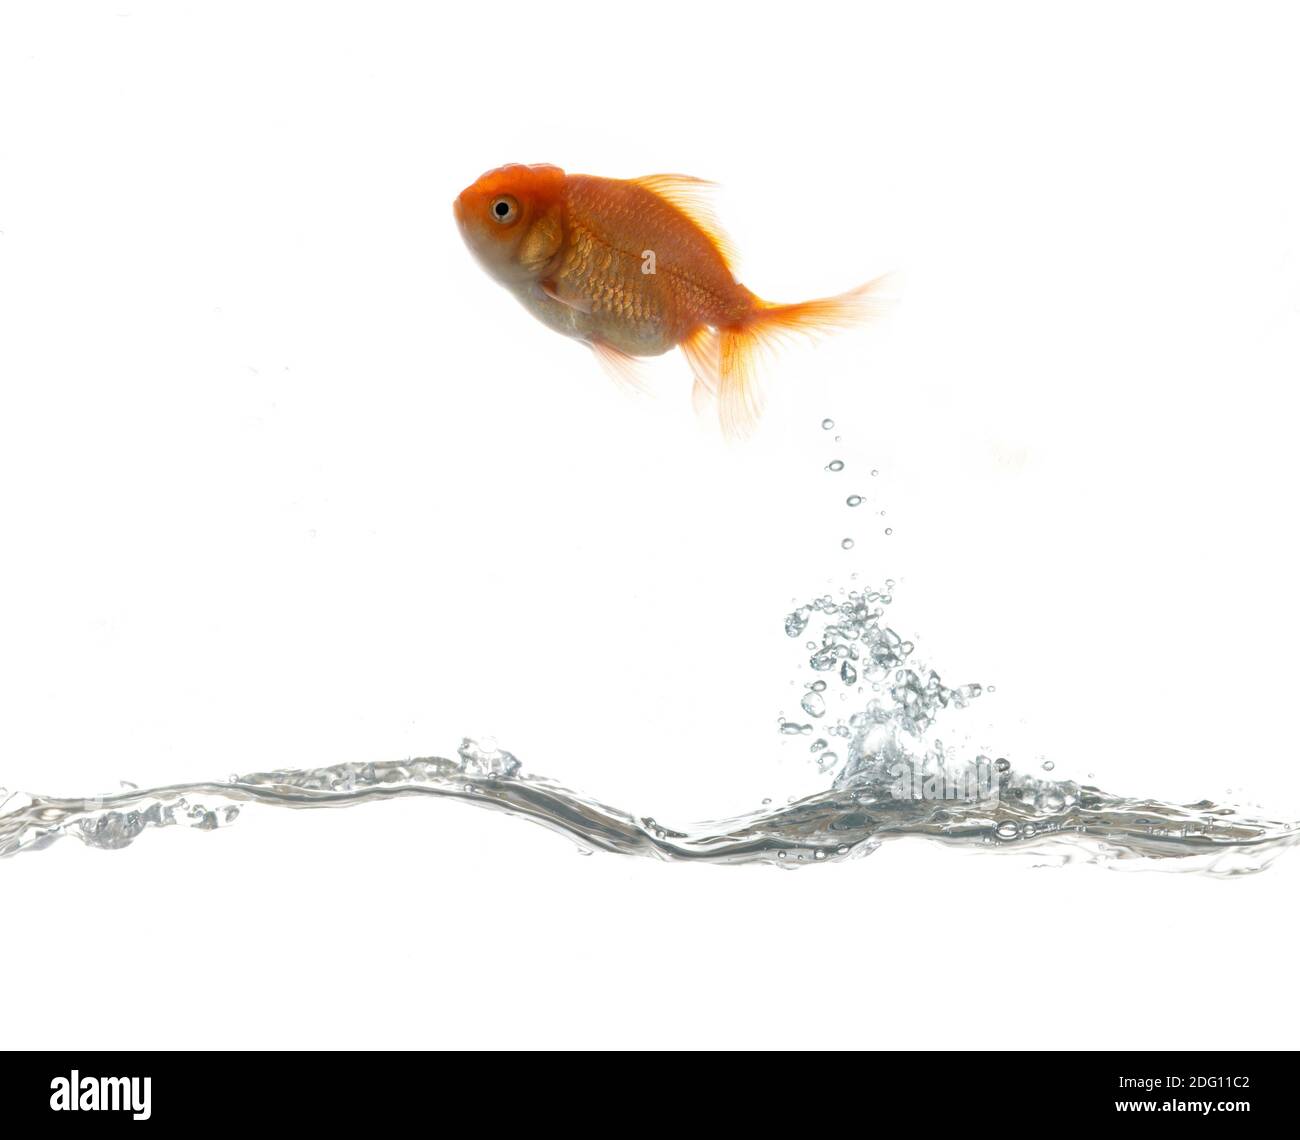 Pets fish on water Stock Photo